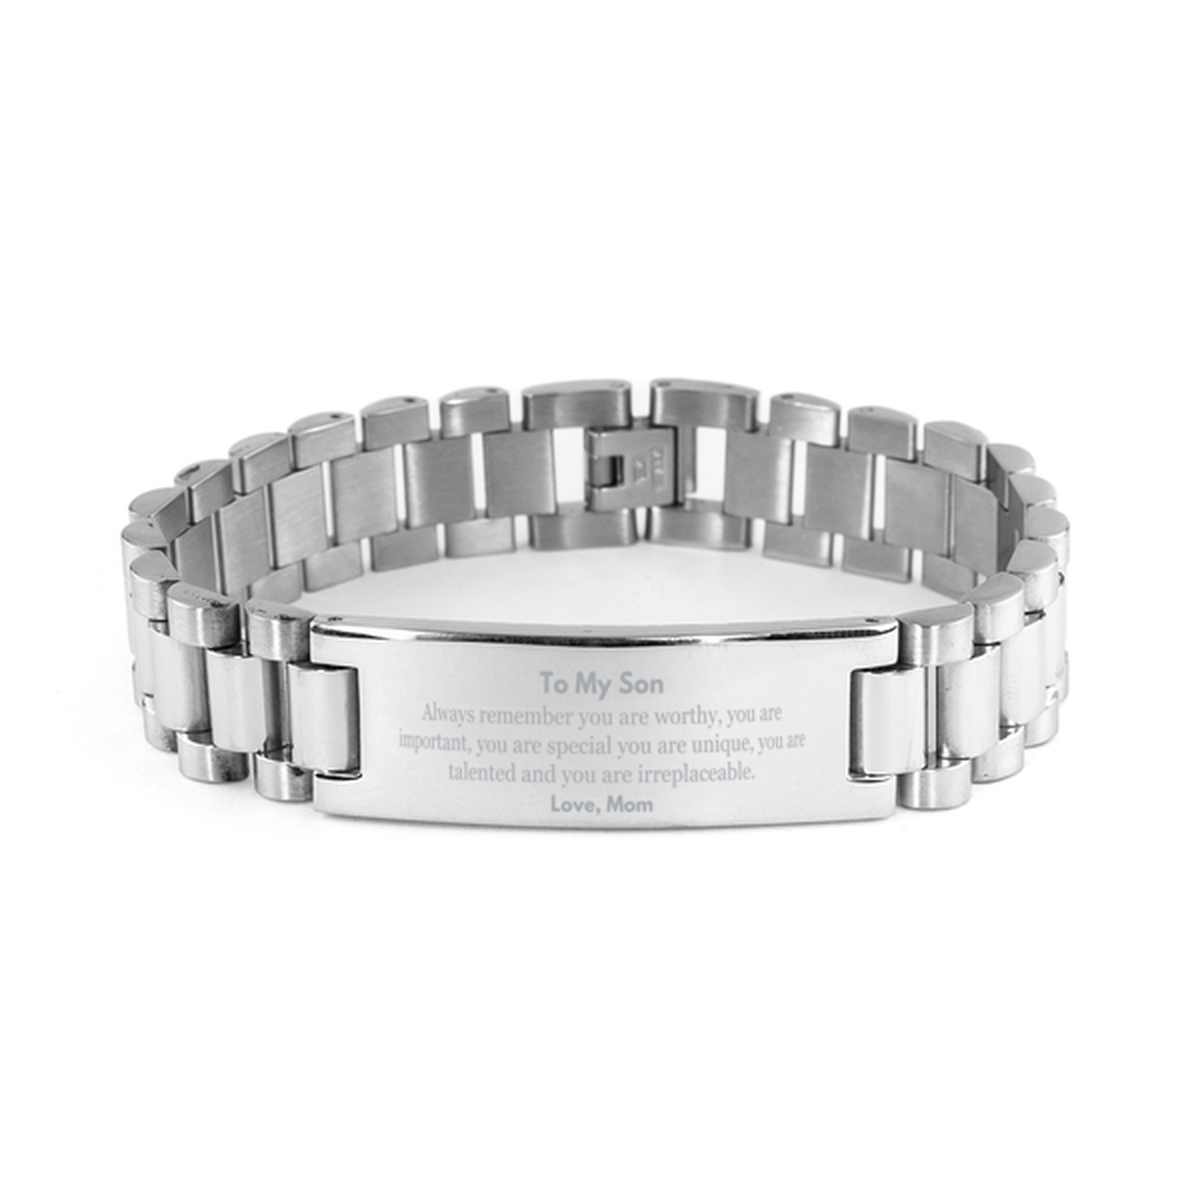 Son Birthday Gifts from Mom, Inspirational Ladder Stainless Steel Bracelet for Son Christmas Graduation Gifts for Son Always remember you are worthy, you are important. Love, Mom